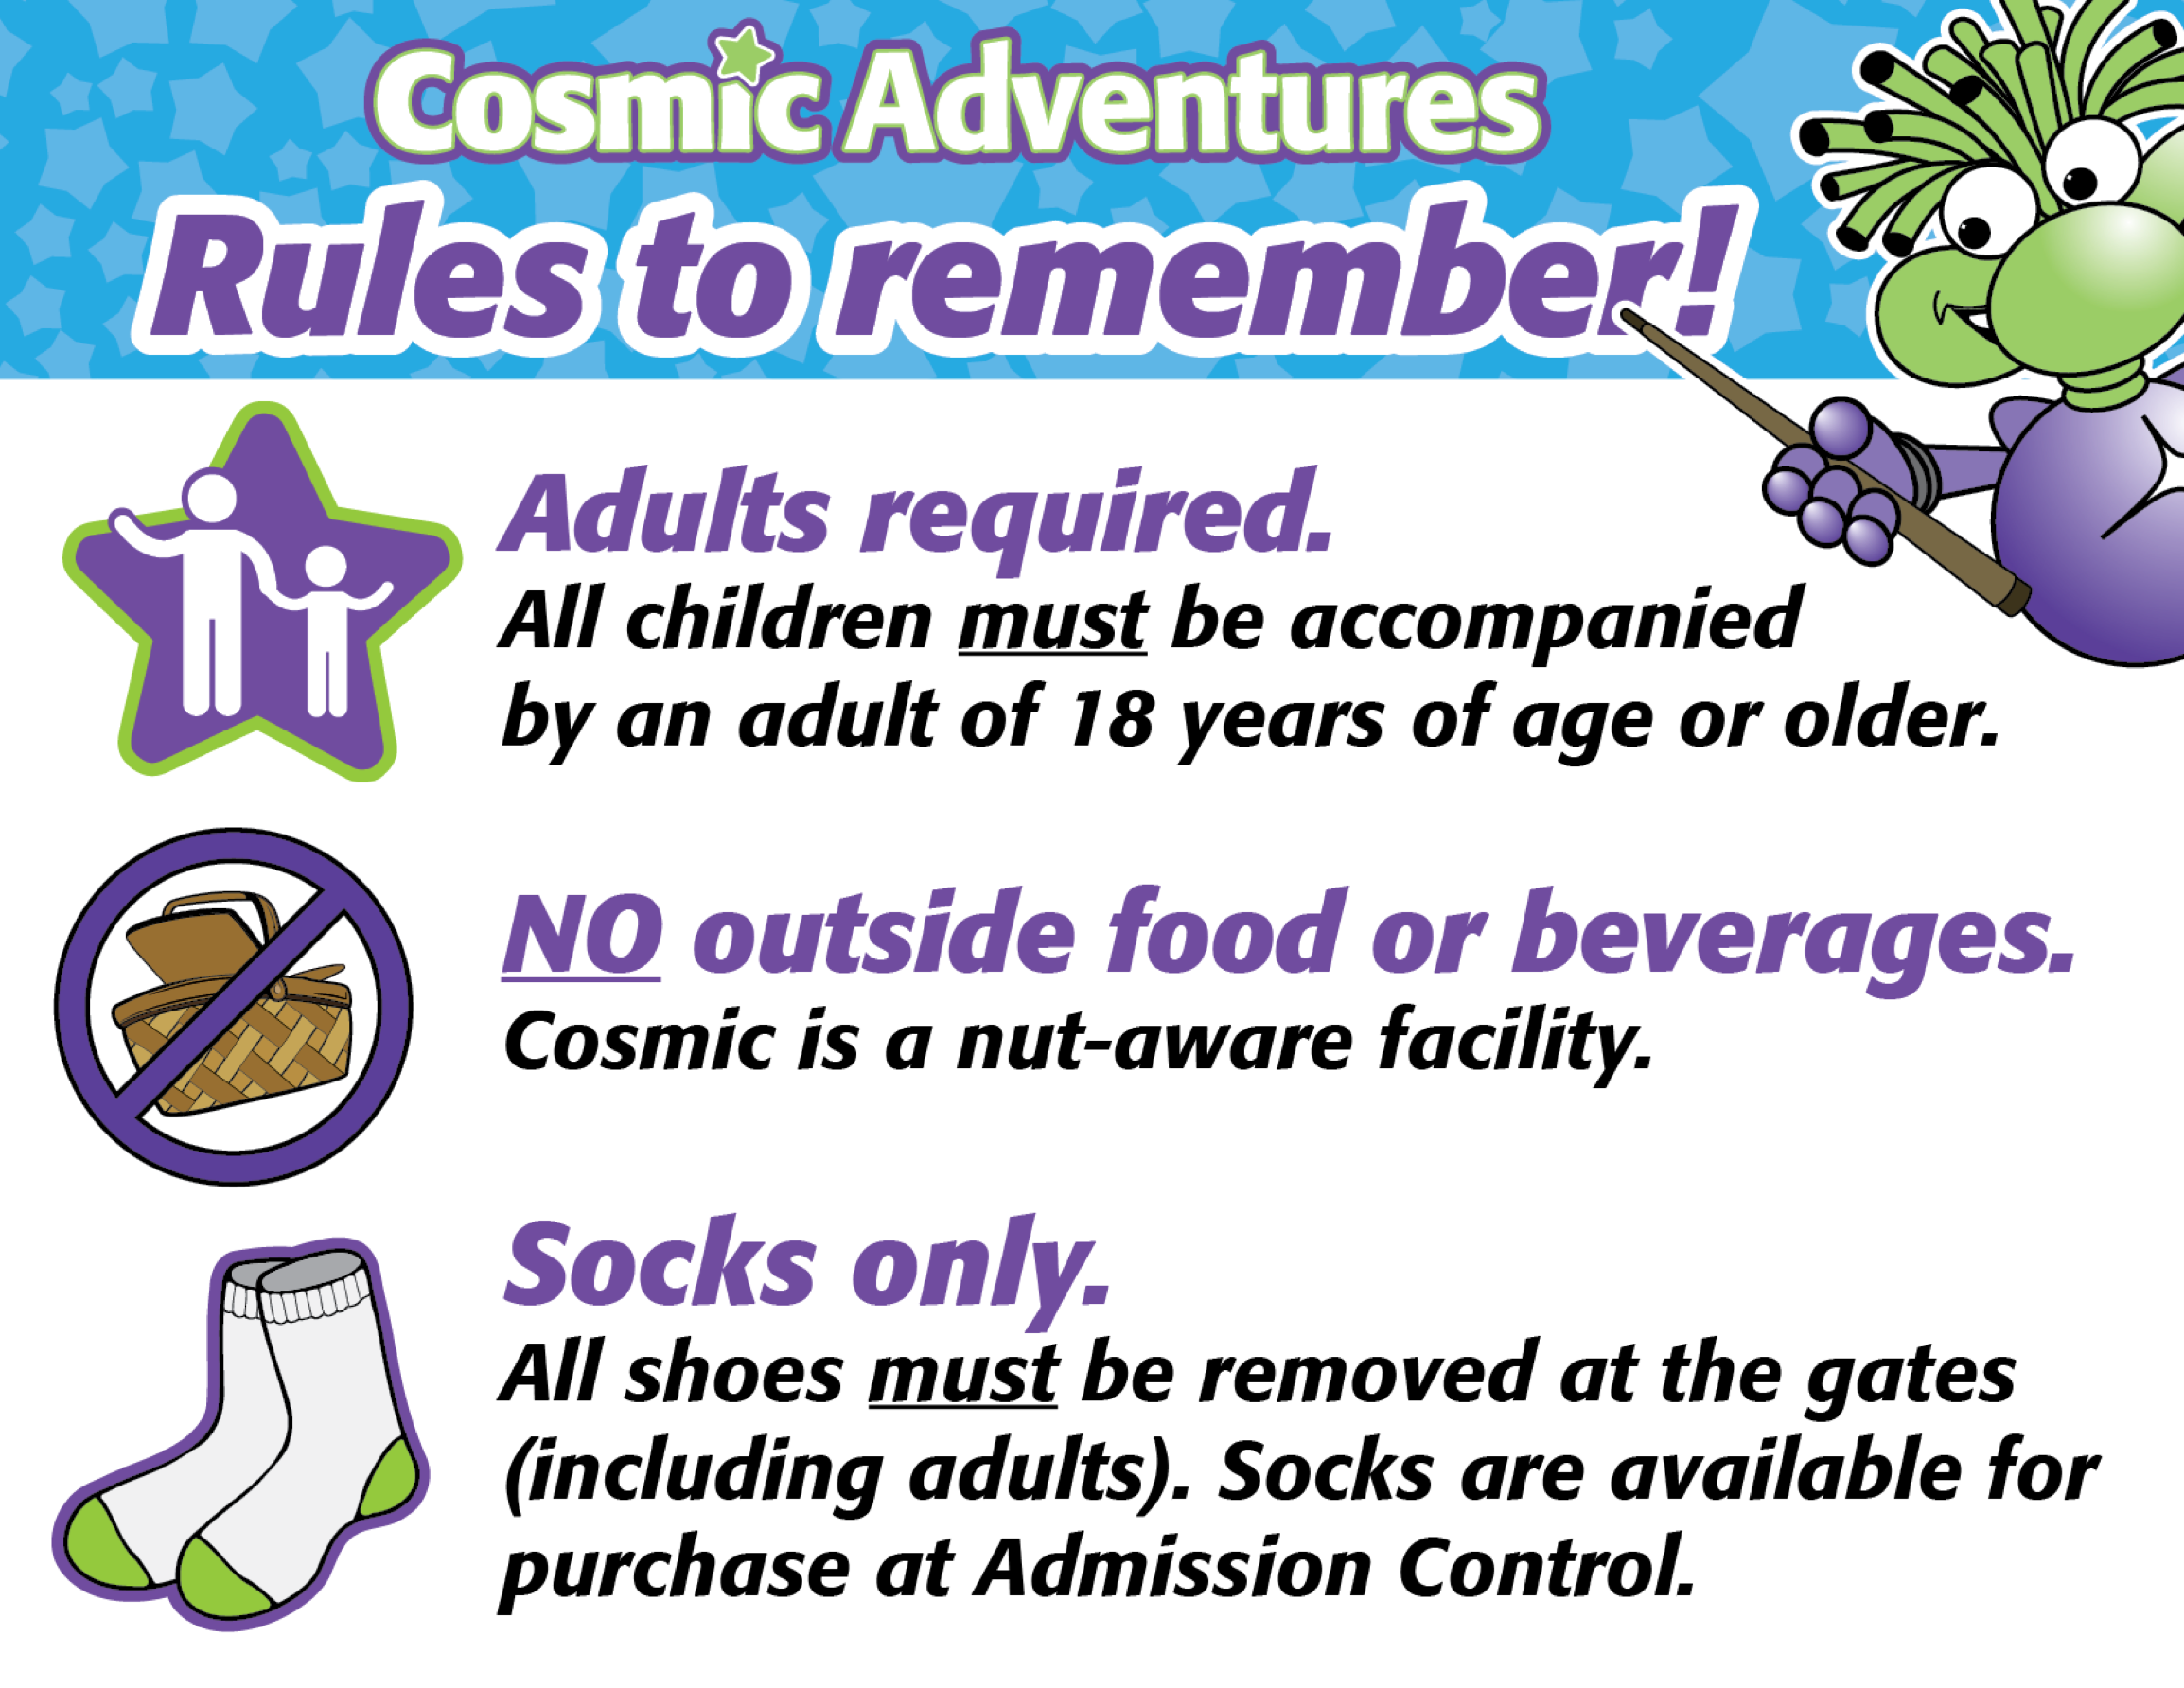 Cosmic Adventures Rules to Remember